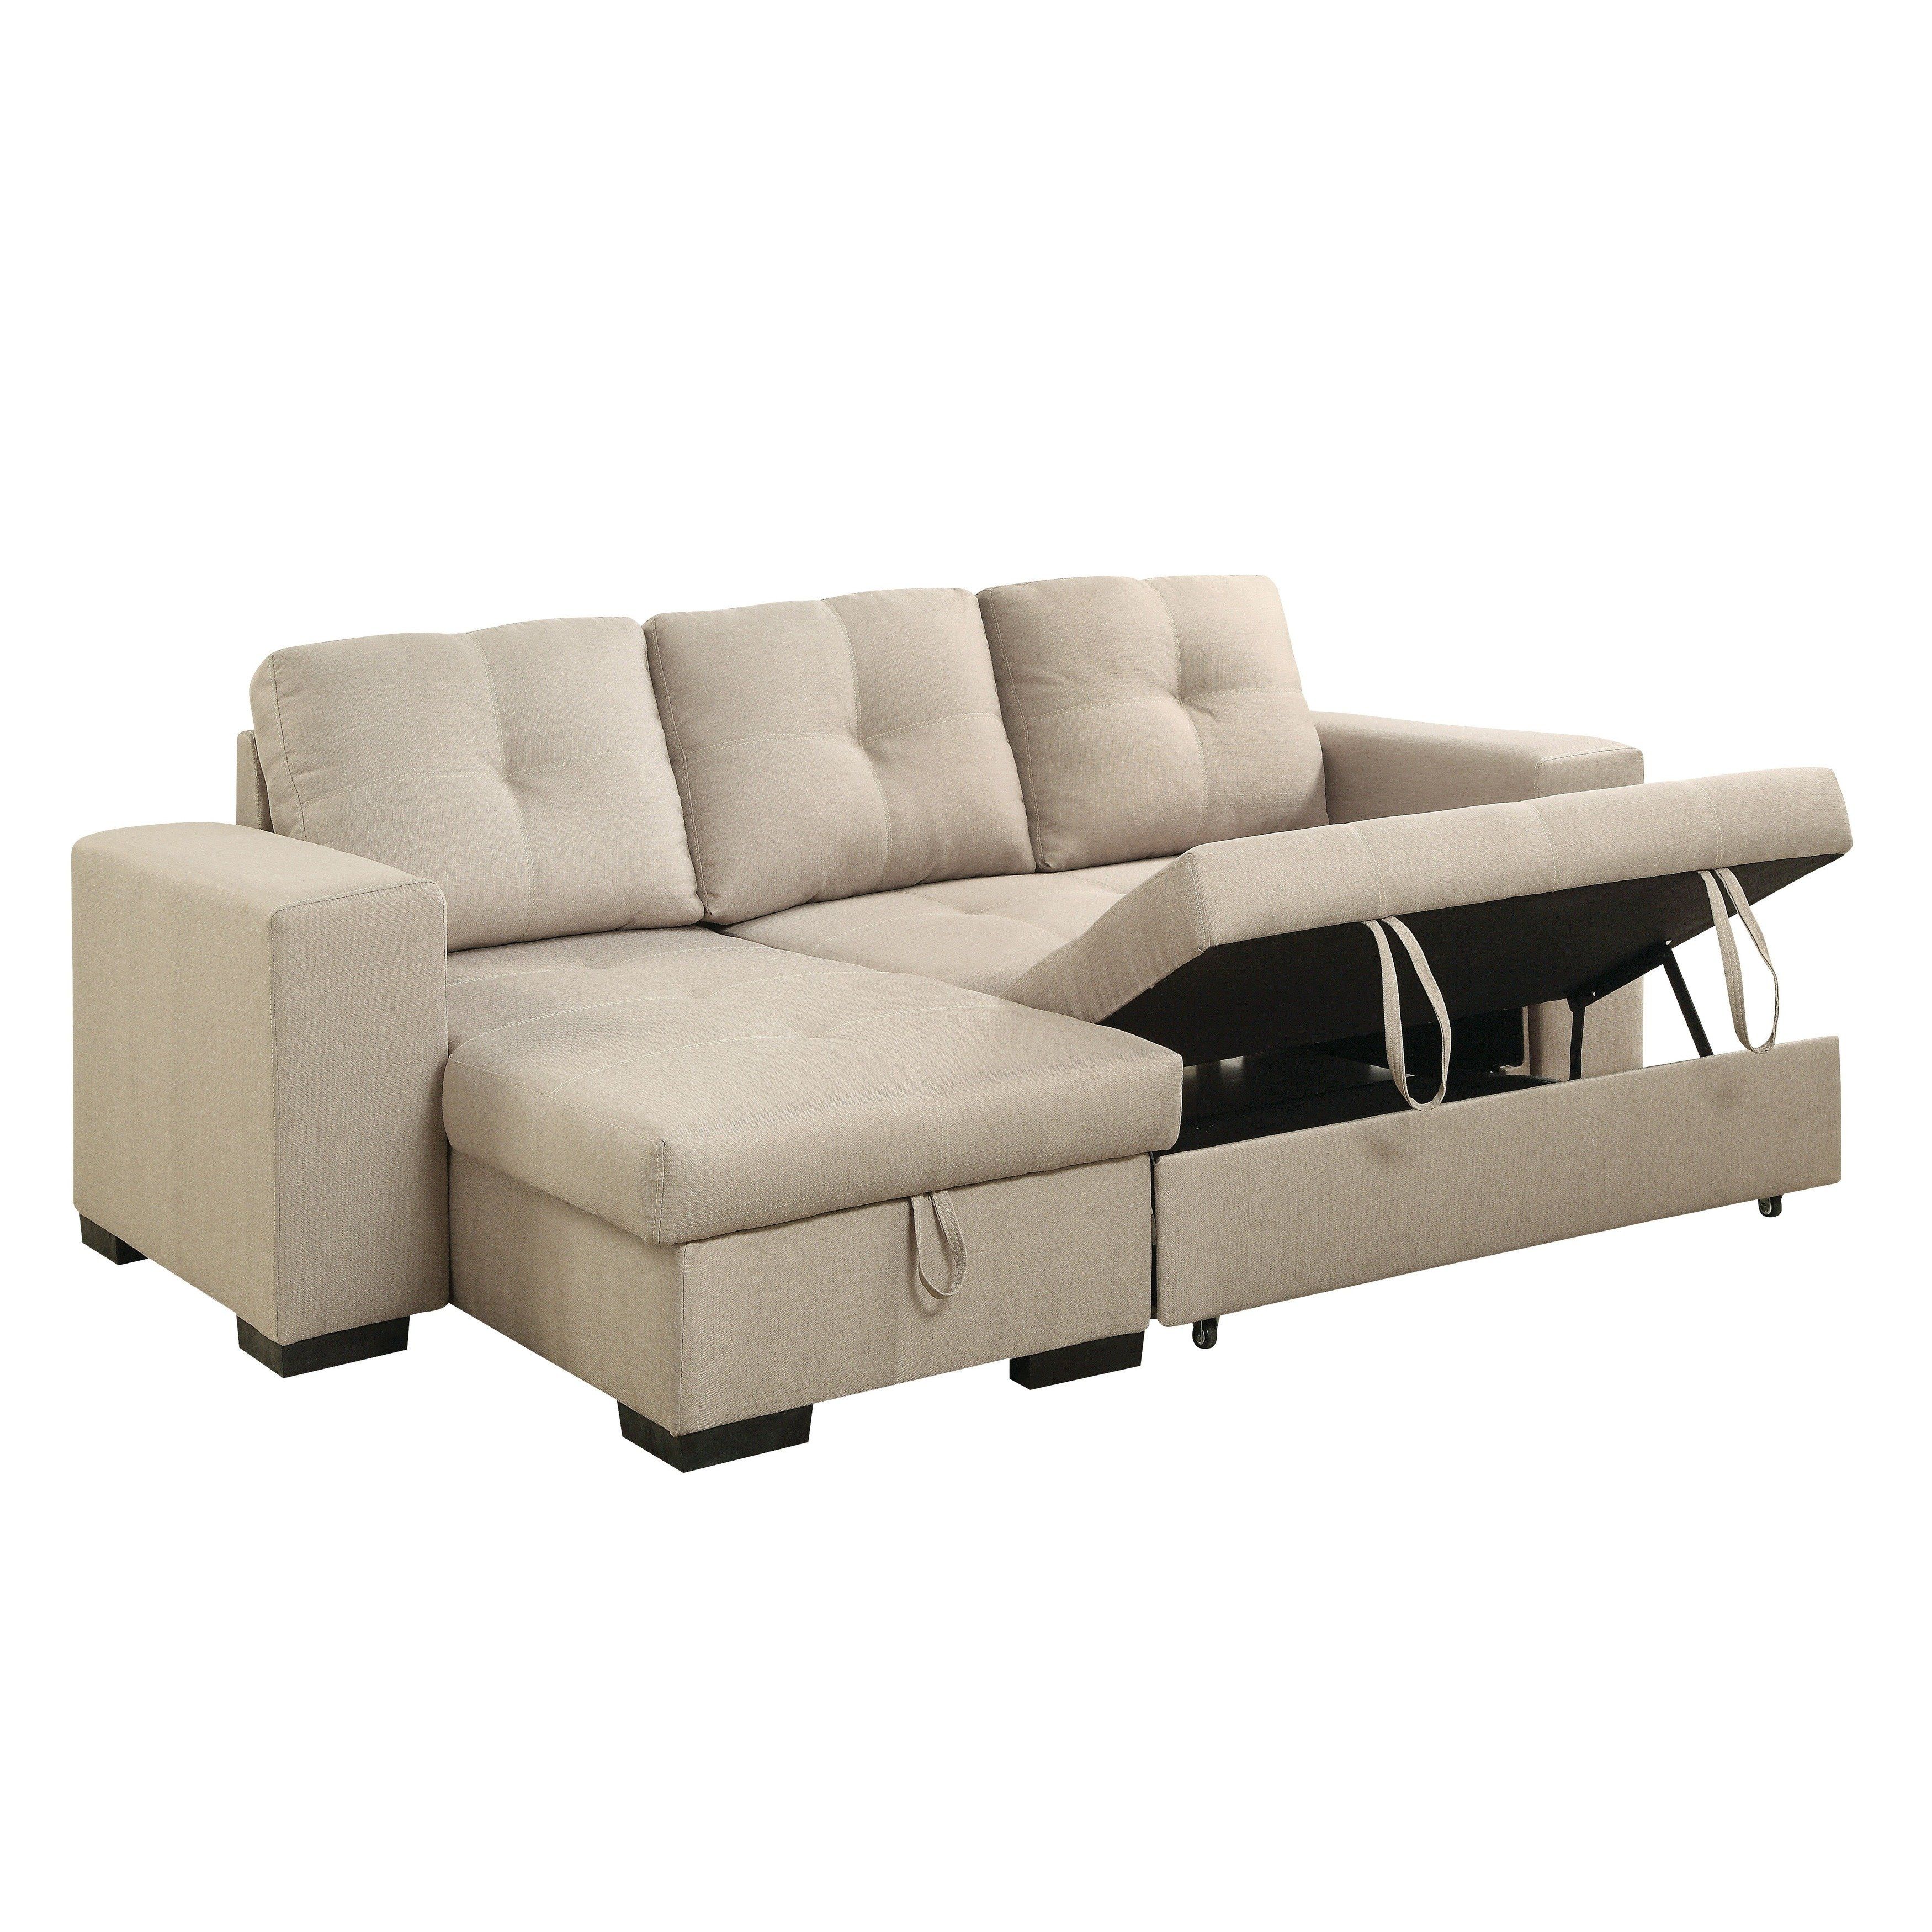 Reversible Sofa Bed | Baci Living Room Pertaining To Taren Reversible Sofa/chaise Sleeper Sectionals With Storage Ottoman (View 7 of 30)